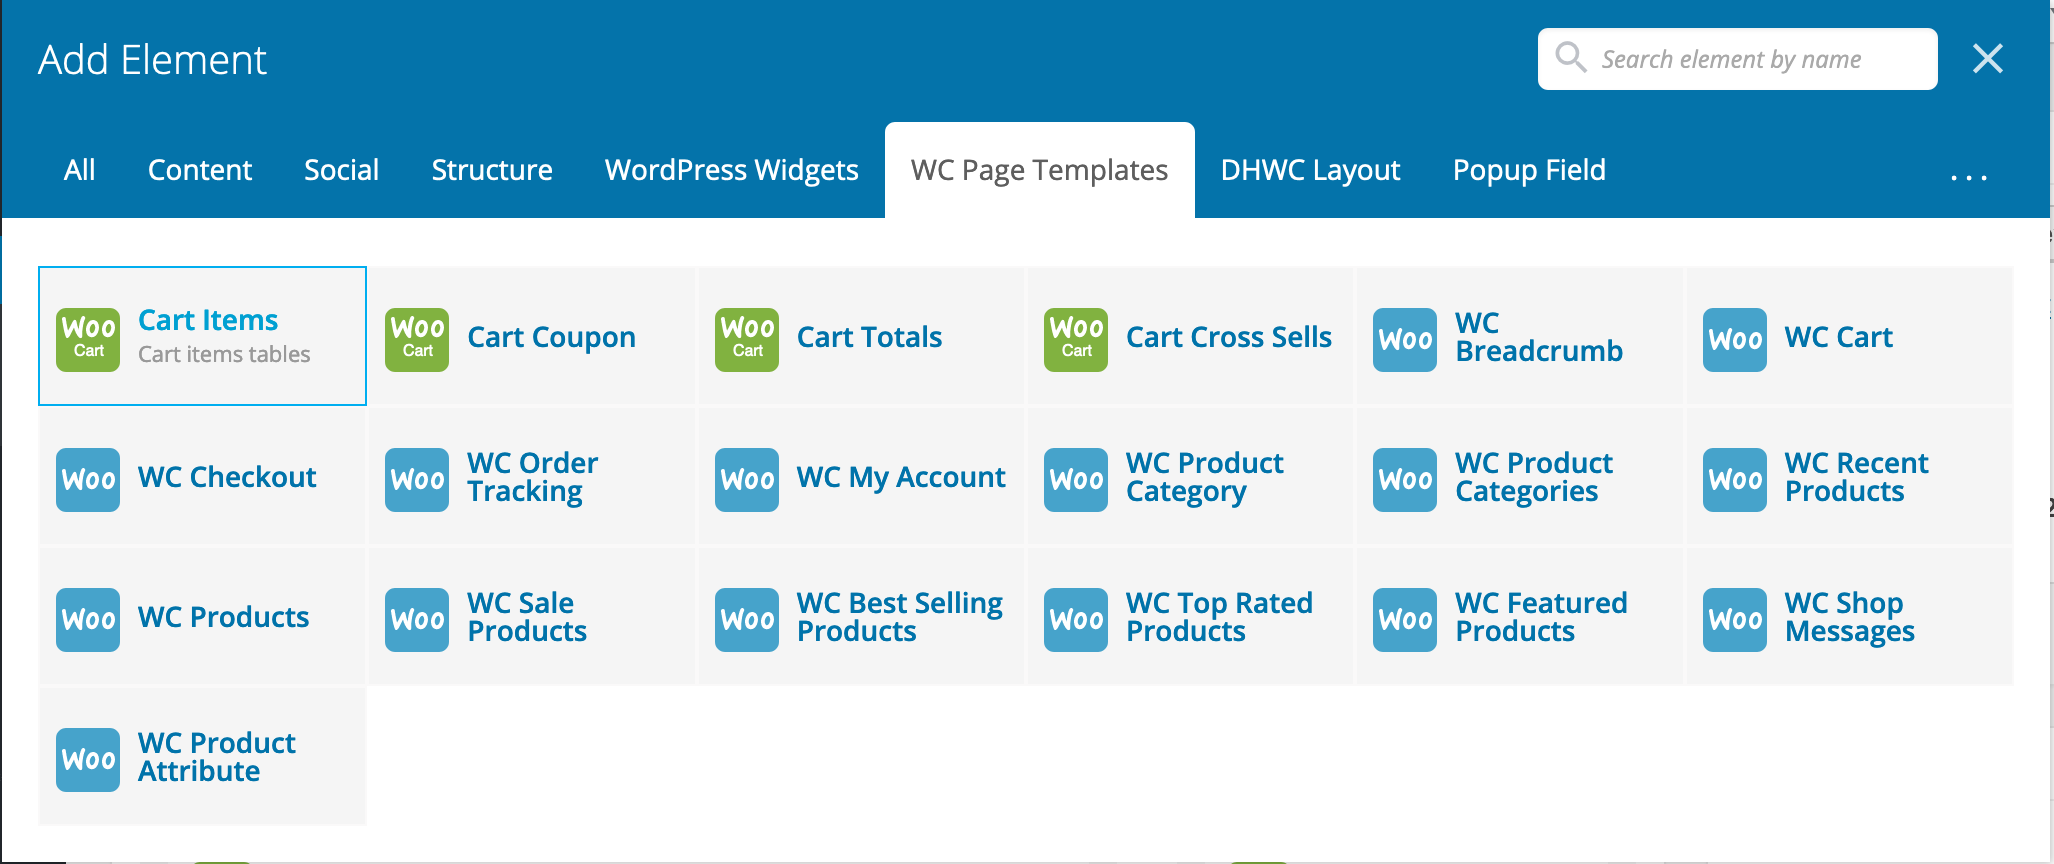 DHWCPage - WooCommerce Page Builder - 7